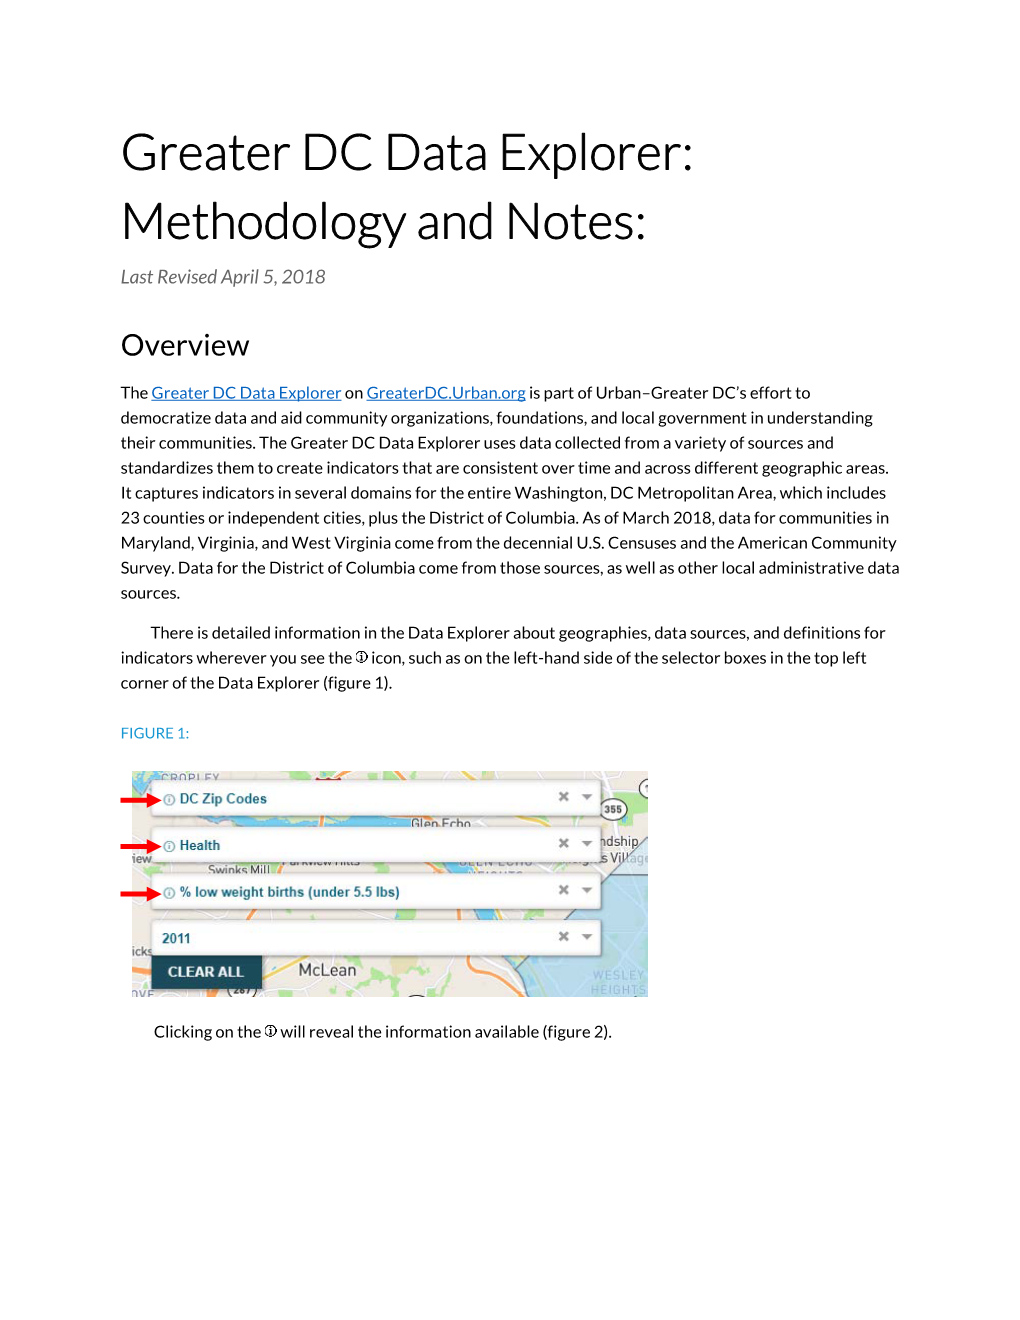 Greater DC Data Explorer: Methodology and Notes